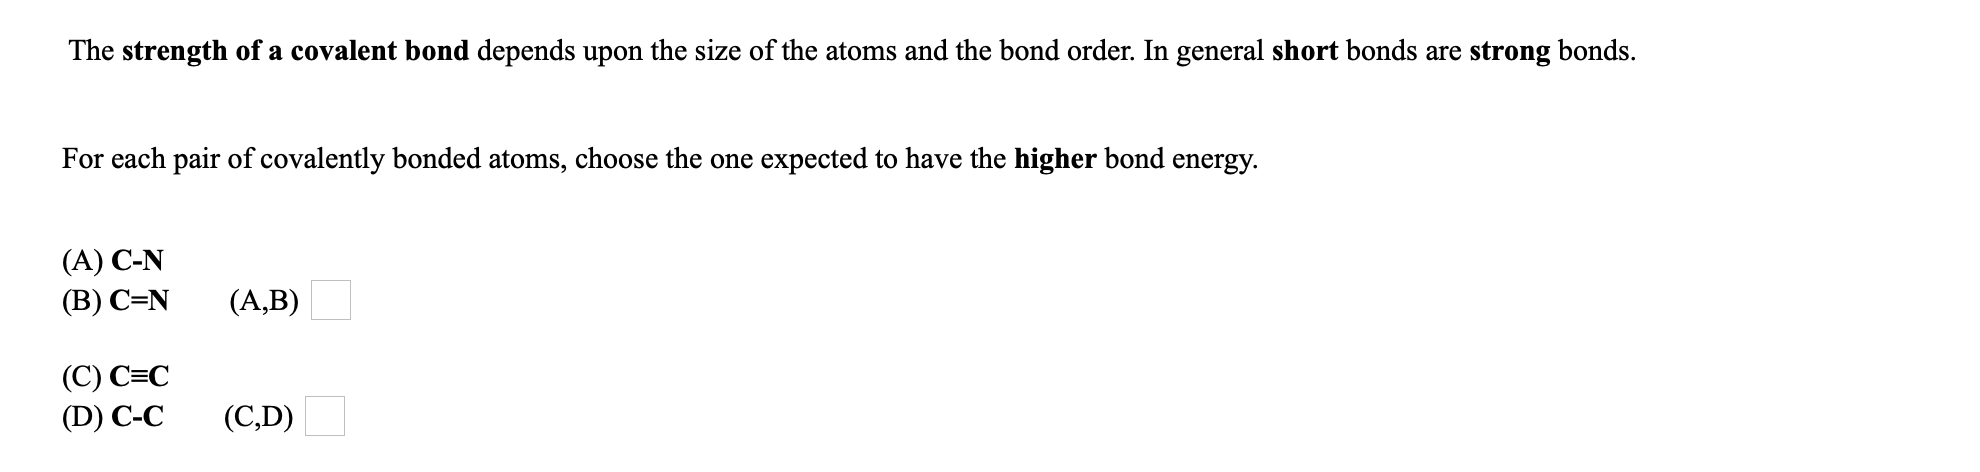 The strength of a covalent bond depends upon the size of the atoms and the bond order. In general short bonds are strong bonds.
For each pair of covalently bonded atoms, choose the one expected to have the higher bond energy.
(A) C-N
(B) C=N
(A,B)
(C) C=C
(D) C-C
(C,D)
